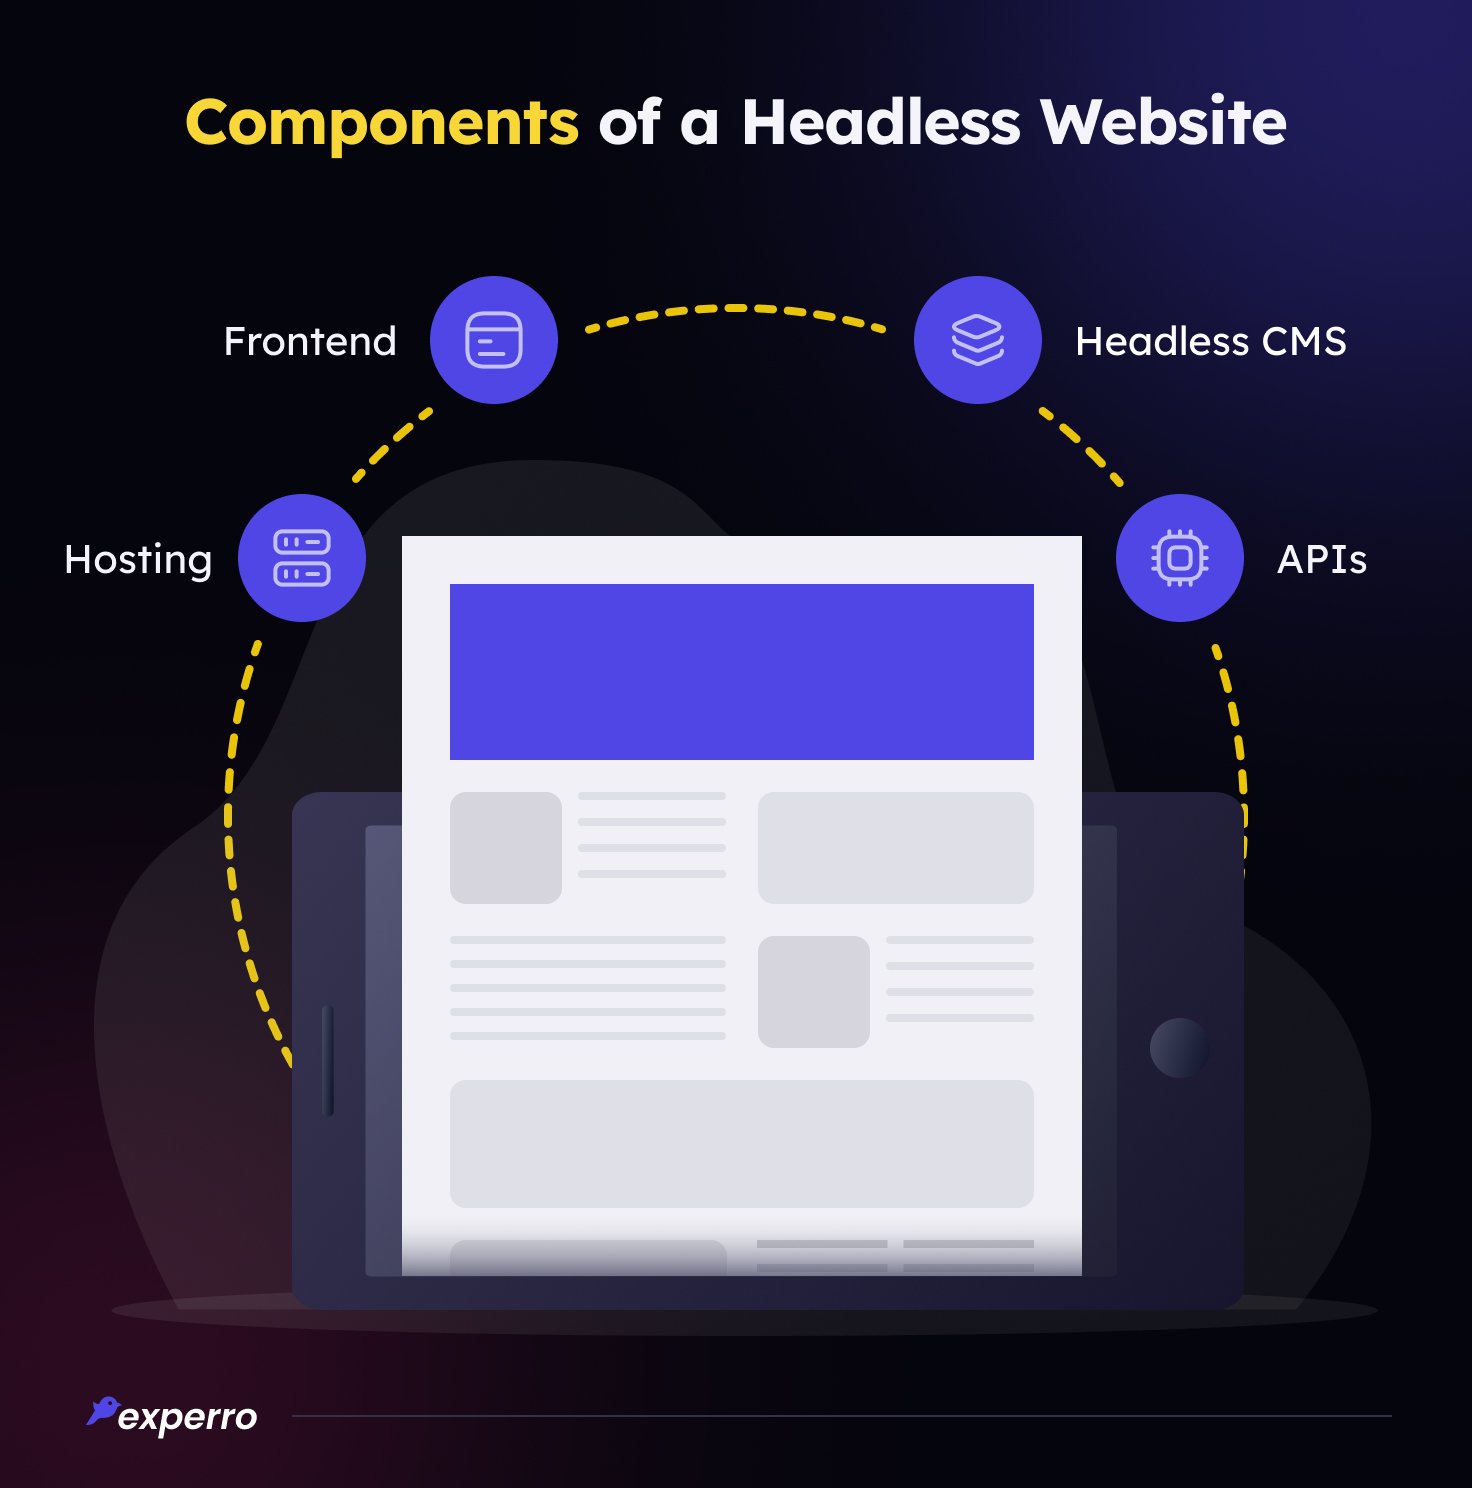 Components of Headless Website